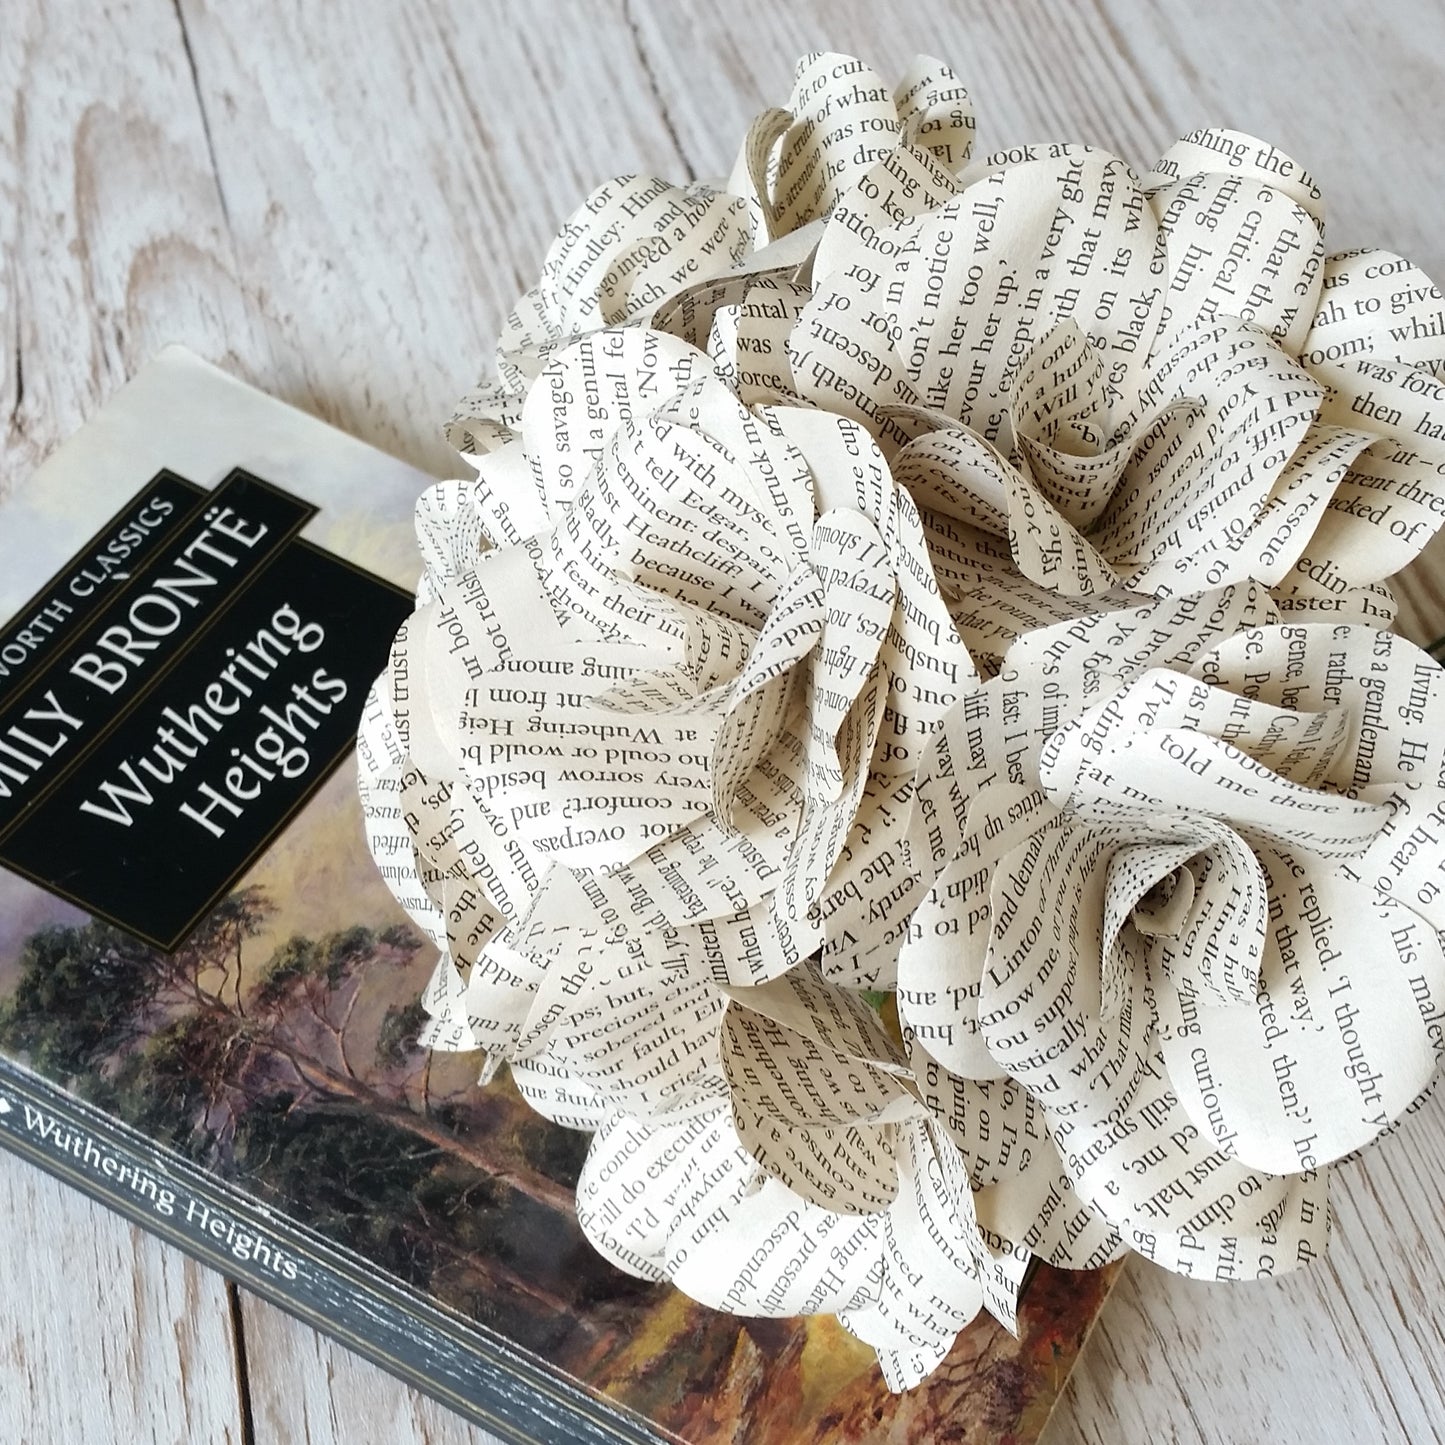 Wuthering Heights Book Paper Flowers